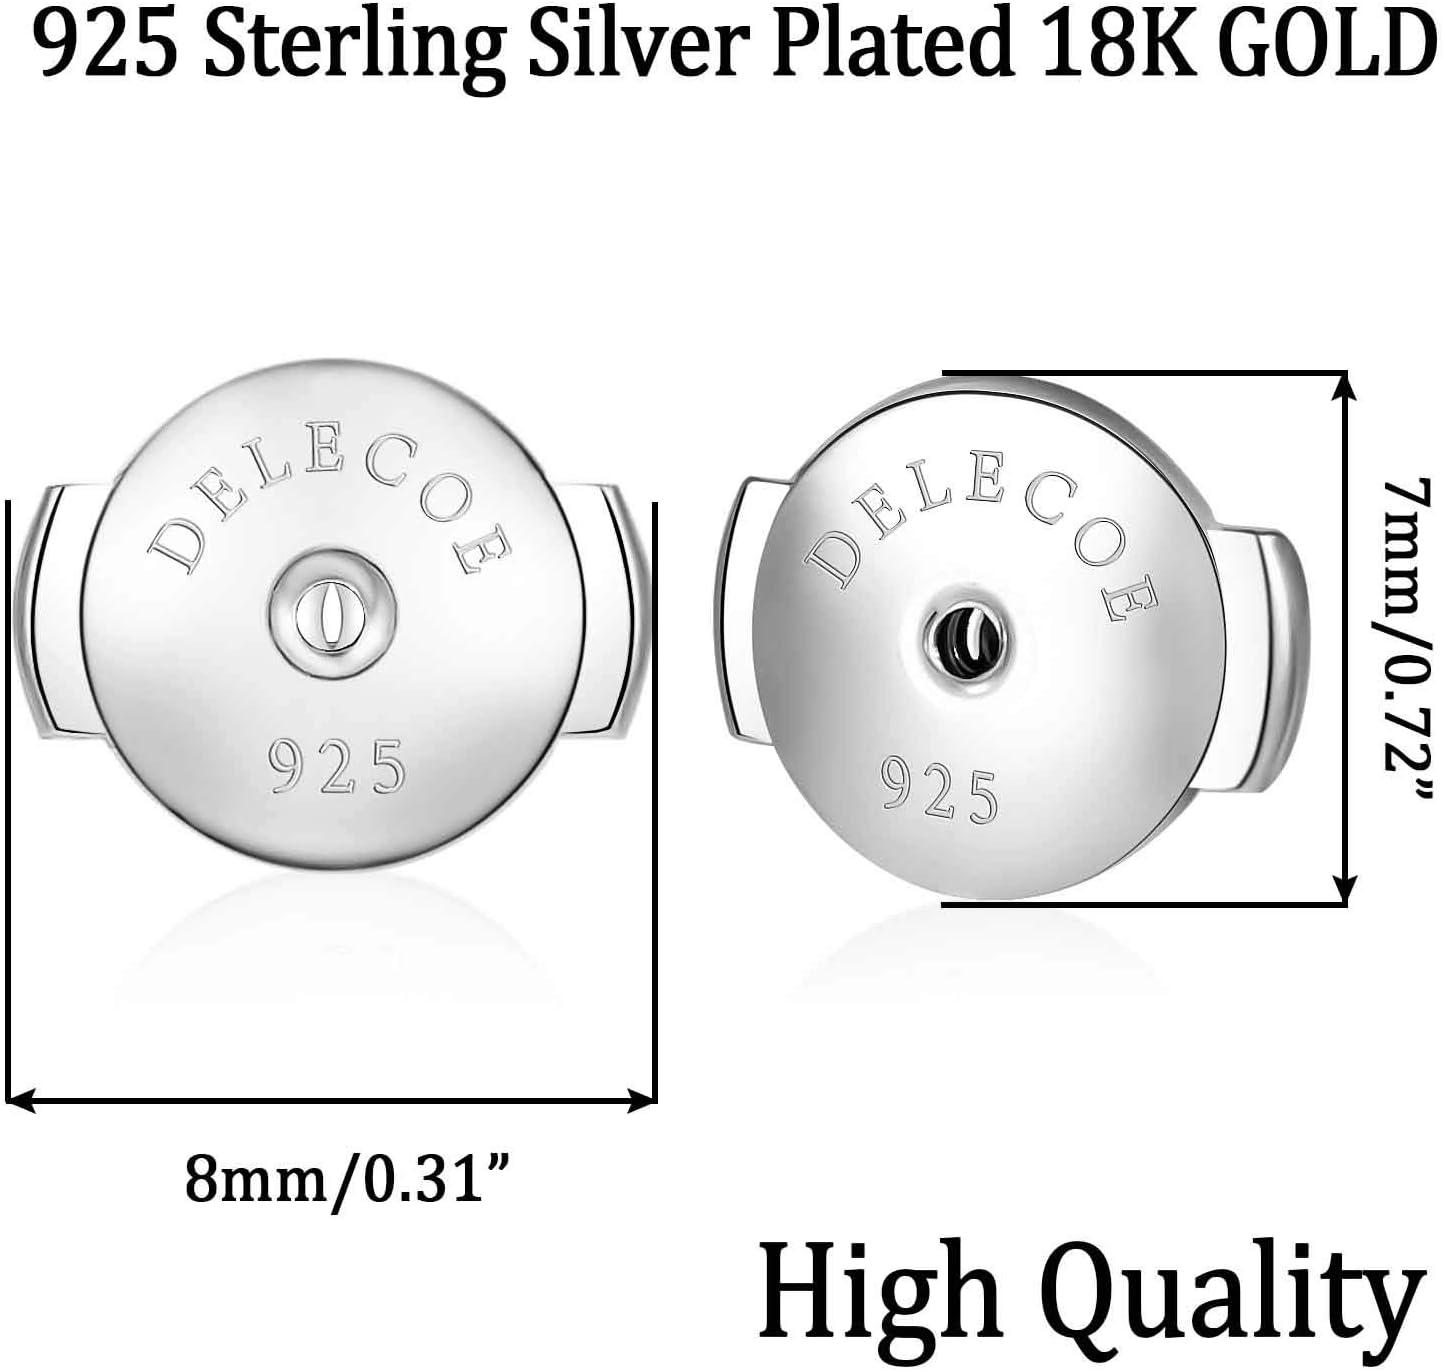  DELECOE 925 Silver Earring Backs Replacements for